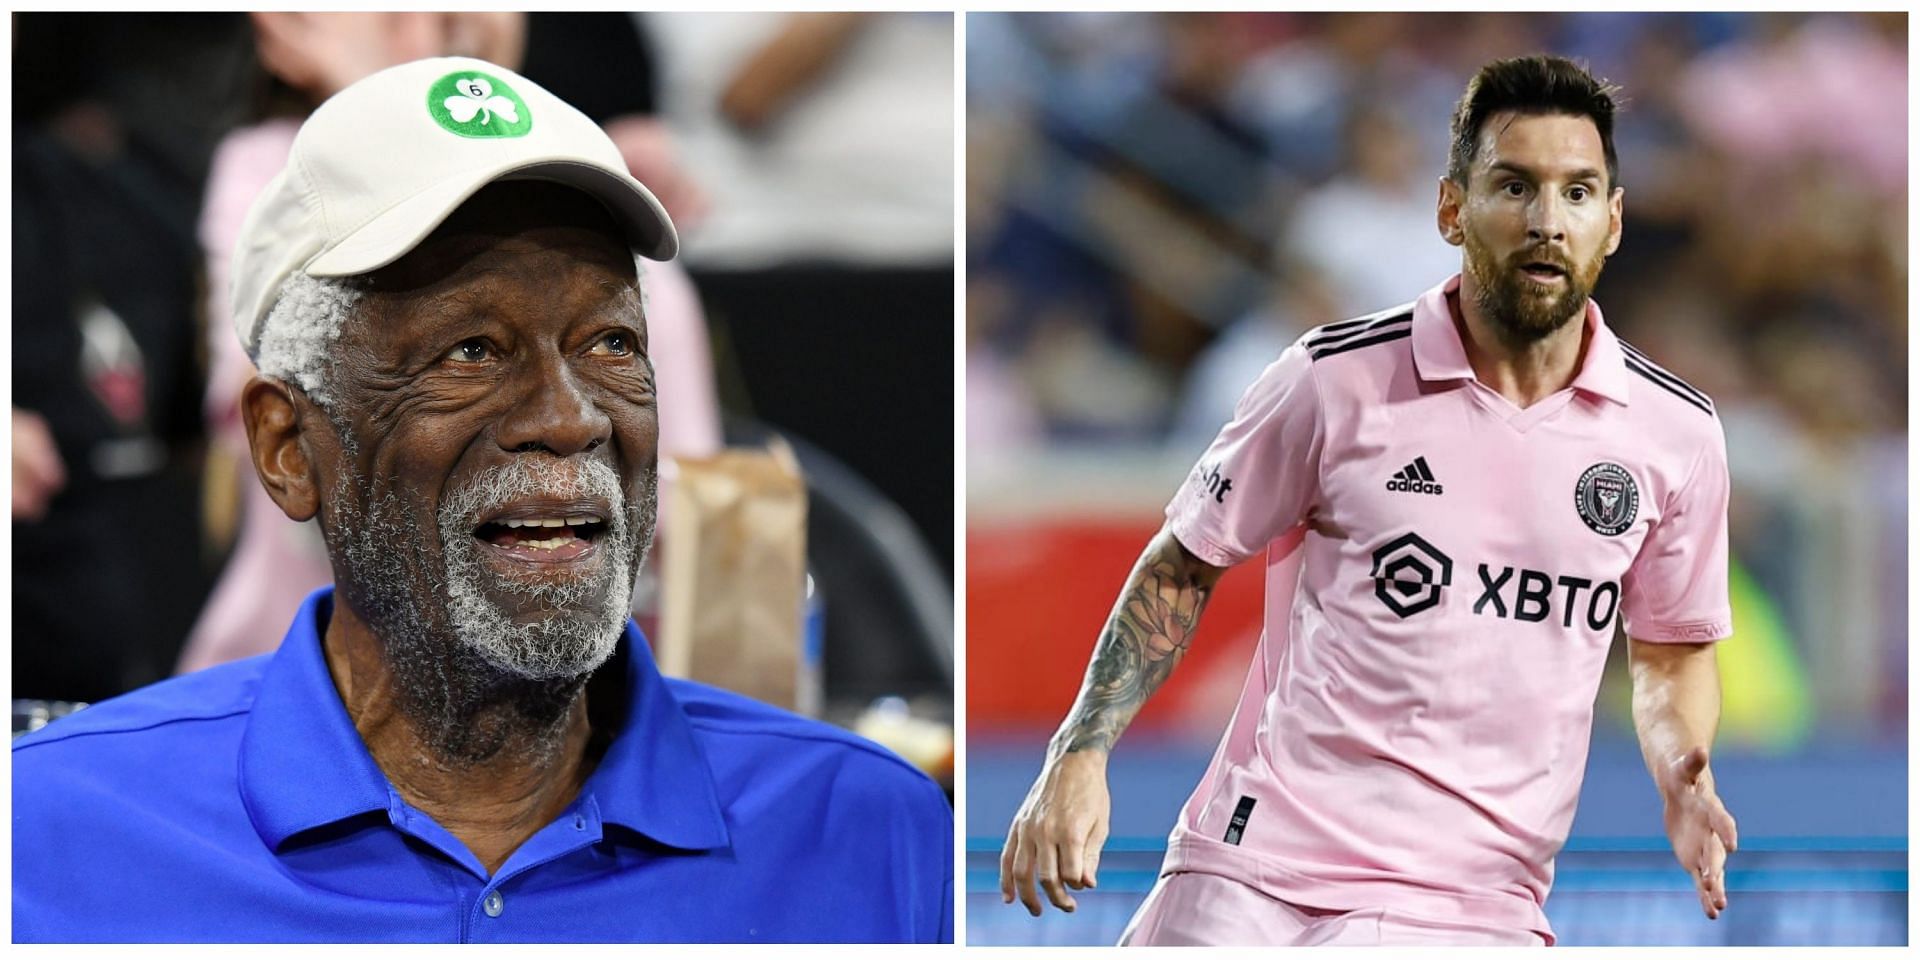 Bill Russell gets an homage from Inter Miami star Lionel Messi